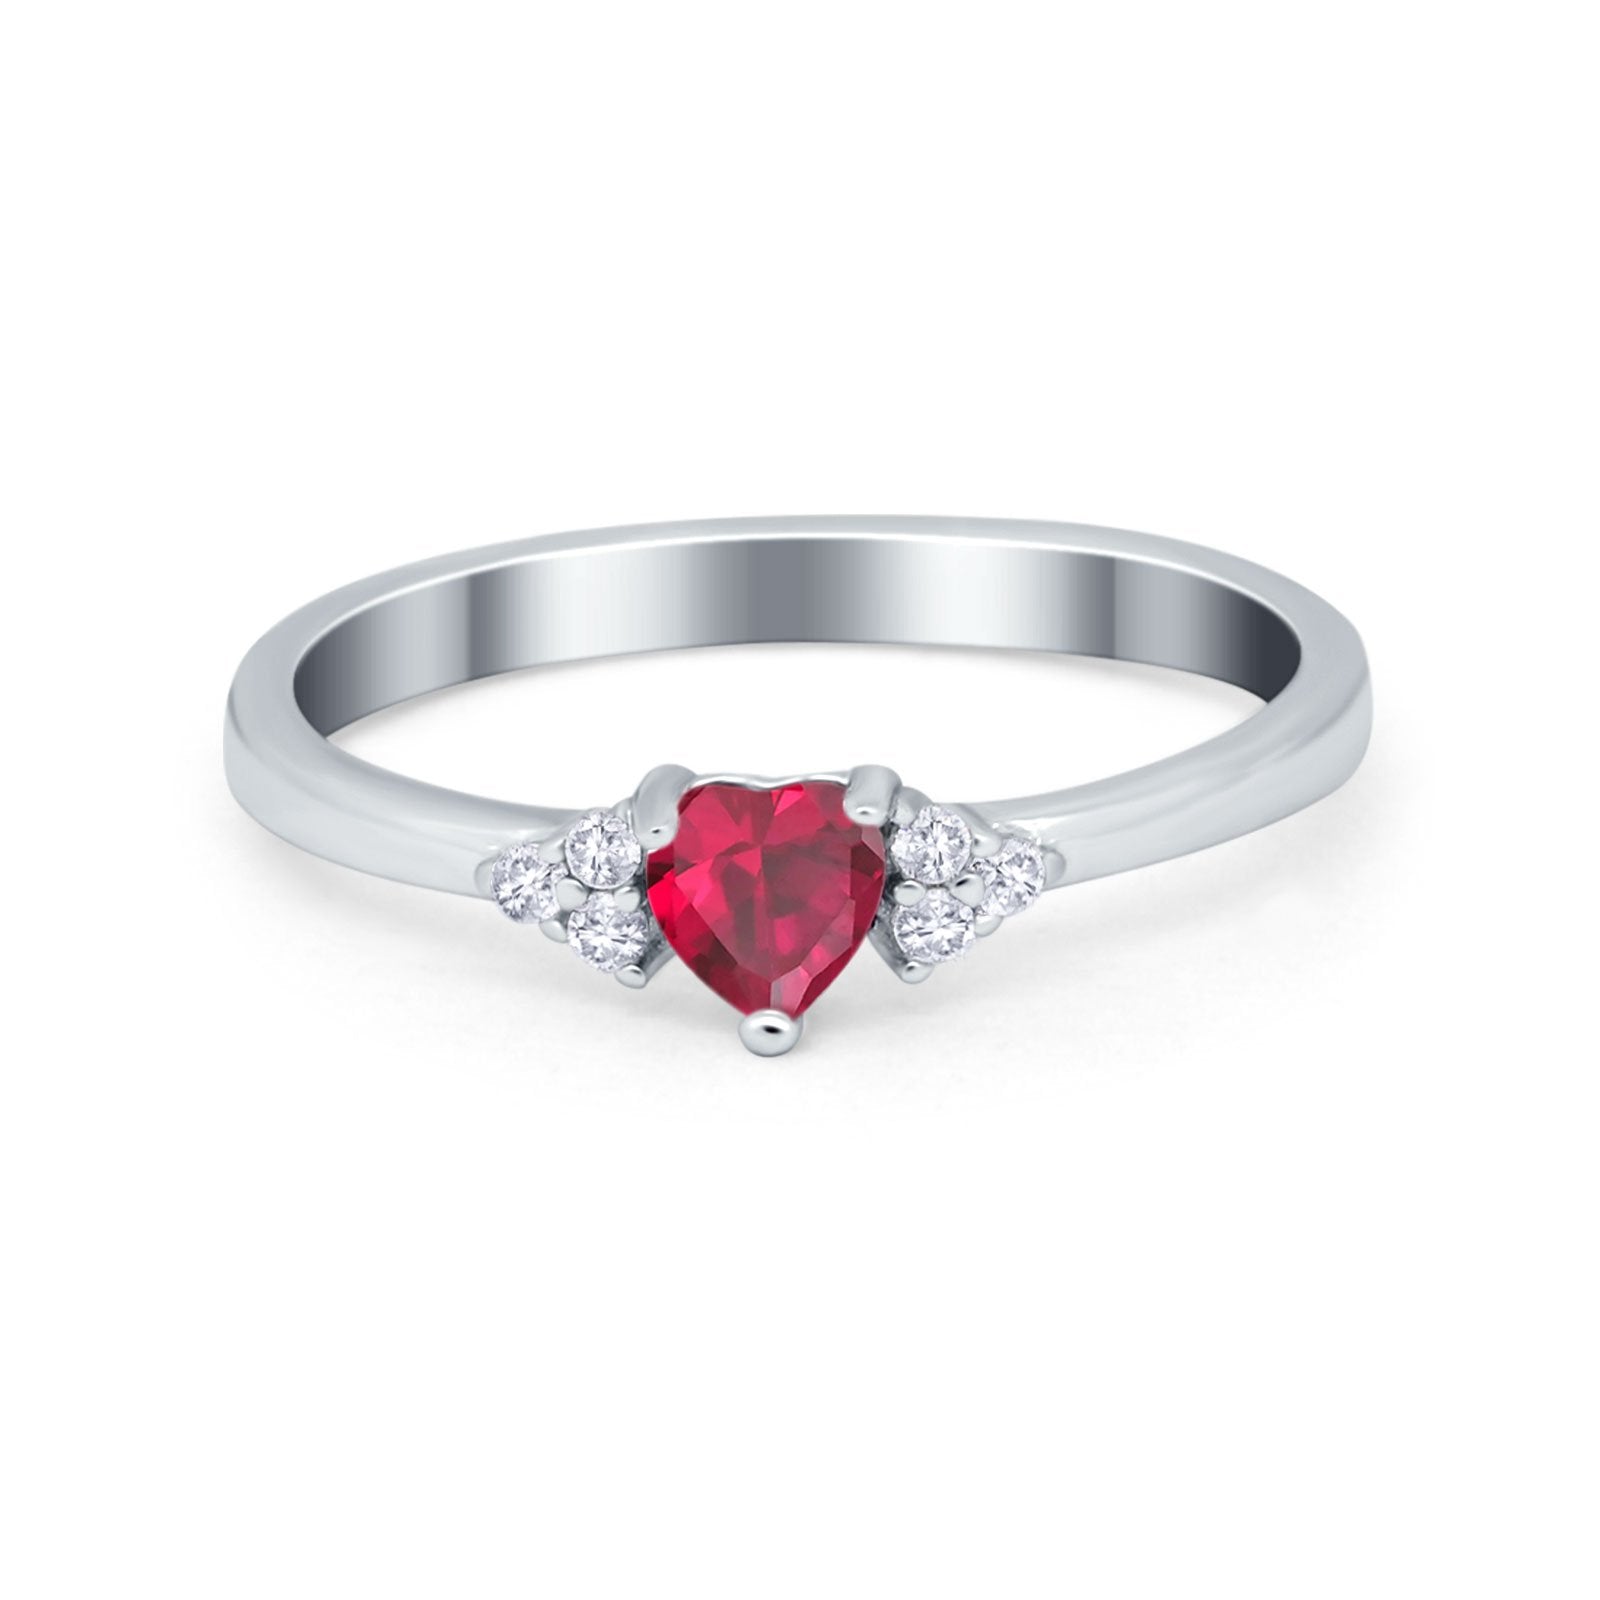 Engagement Heart Promise Ring Round Simulated Cubic Zirconia 925 Sterling Silver